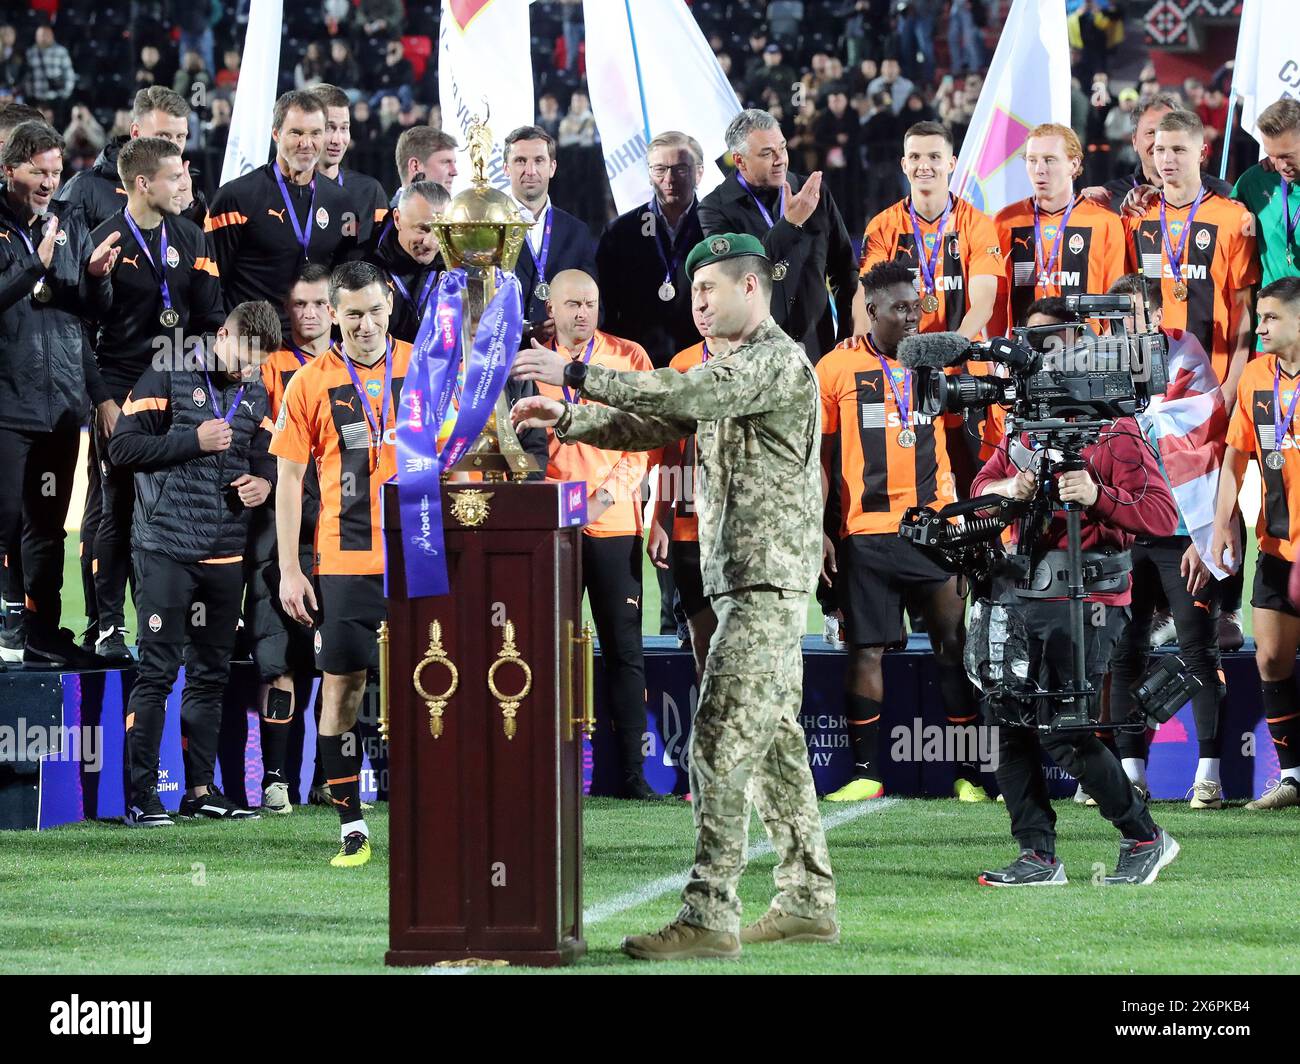 RIVNE, UKRAINE - MAY 15, 2024 - Colonel Stanislav Kerod presents the trophy to FC Shakhtar Donetsk after the team won the 2023/24 Ukrainian Cup final match against FC Vorskla Poltava at the Avanhard Stadium, Rivne, western Ukraine. The  Orange-and-Blacks claimed a 2-1 win over their rivals from Poltava and took home the Ukrainian Cup for the 14th time. On May 11, the Miners won the 2023/24 Ukrainian Premier League title early by beating FC Dynamo Kyiv 1-0 in Lviv. Thus, the Donetsk team achieved a golden double for the 2023/24 season and became the most decorated club since Ukraine’s independe Stock Photo